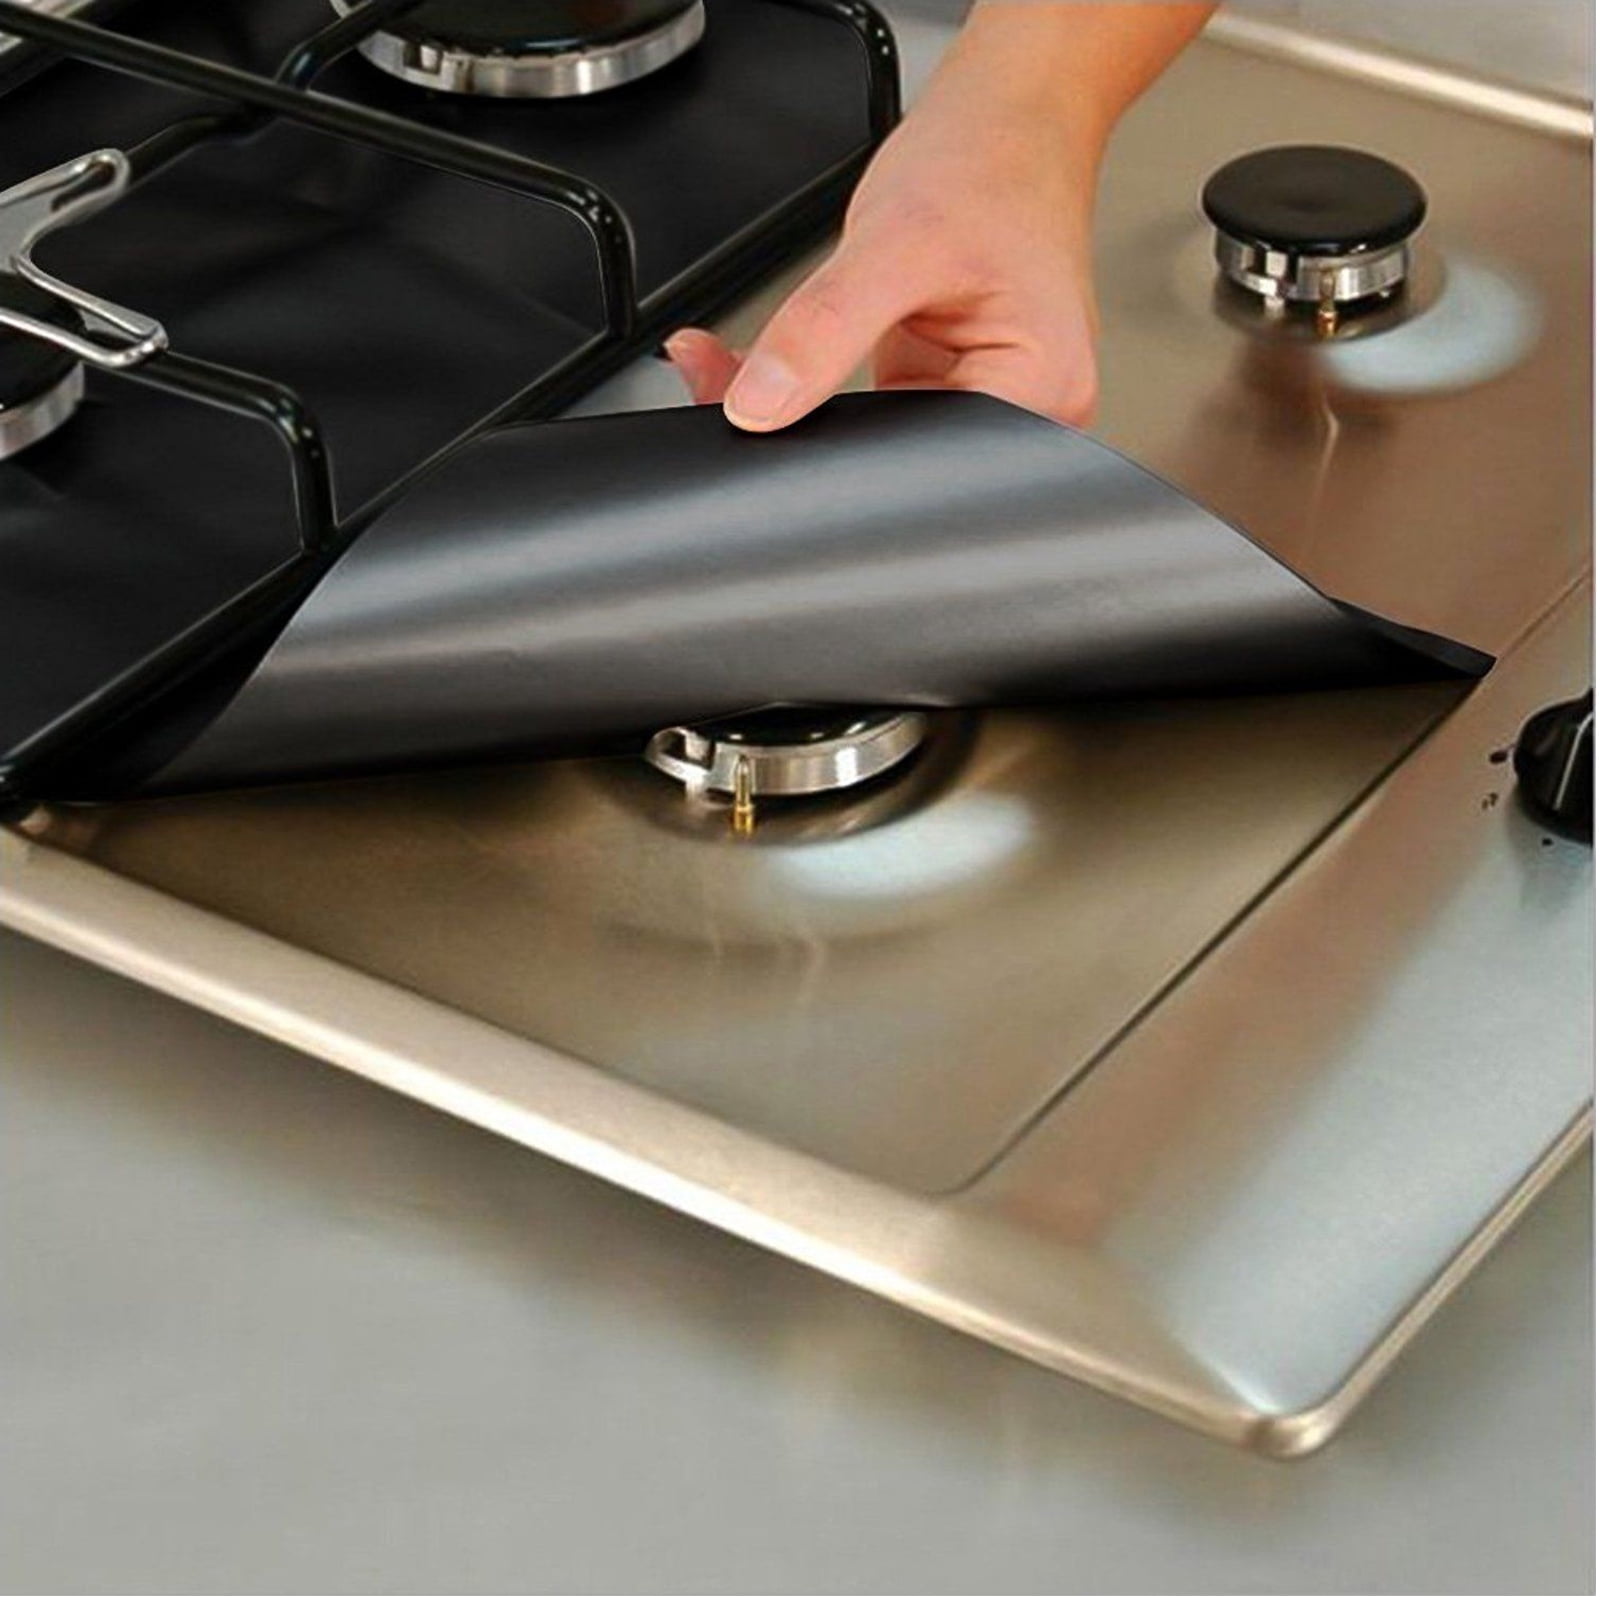 Details about   1-10X Gas Range Stove Top Burner Protector Reusable Liner Clean Non-stick Cover 